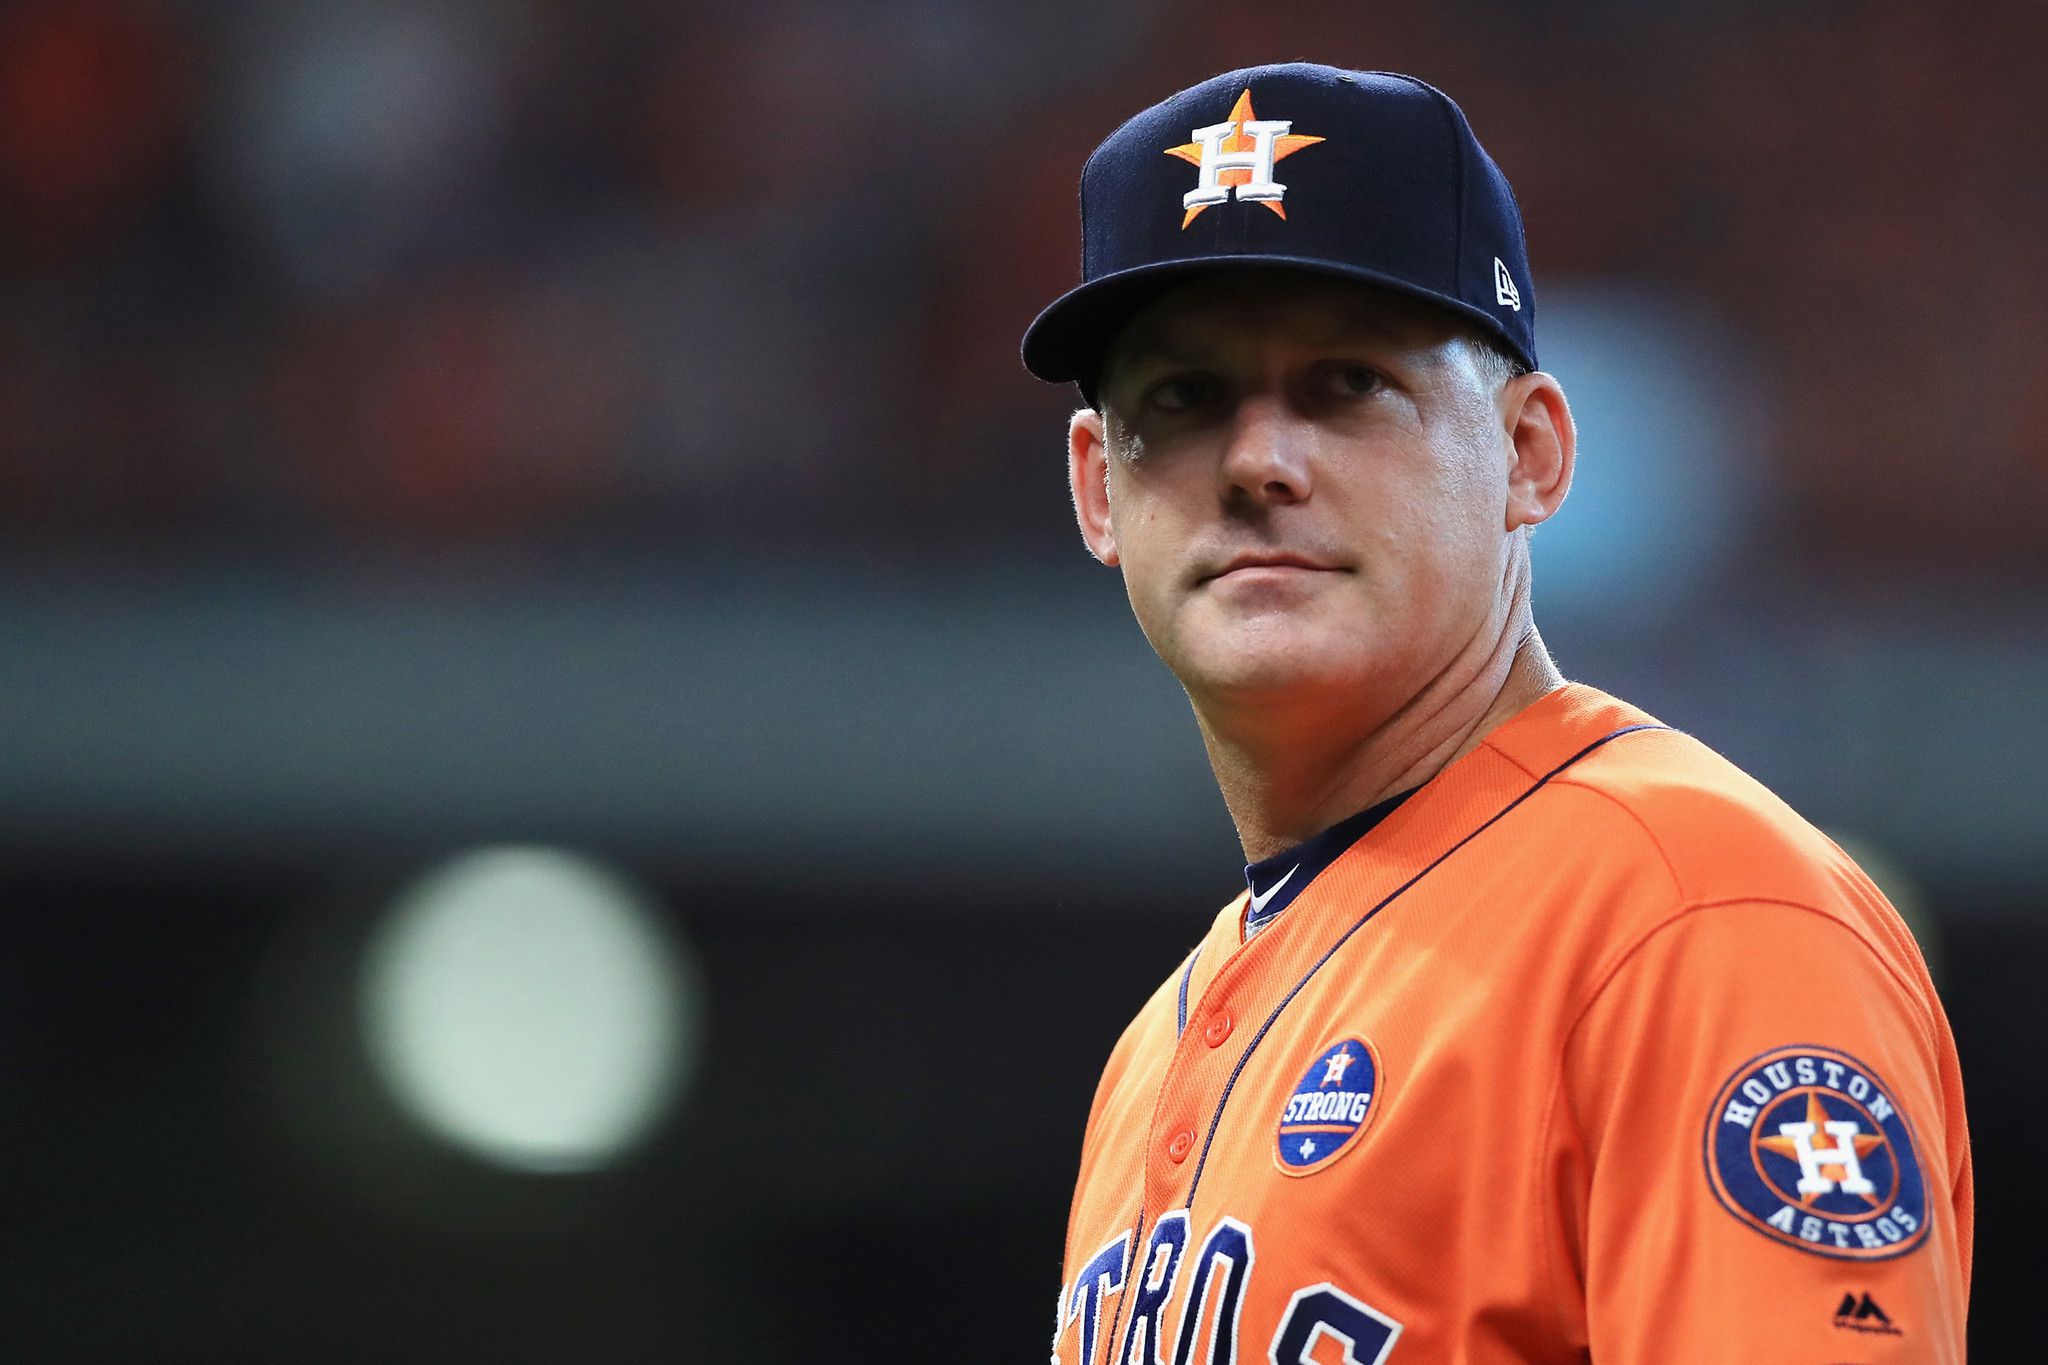 Houston Astros cheating scandal: Five candidates to replace Jeff